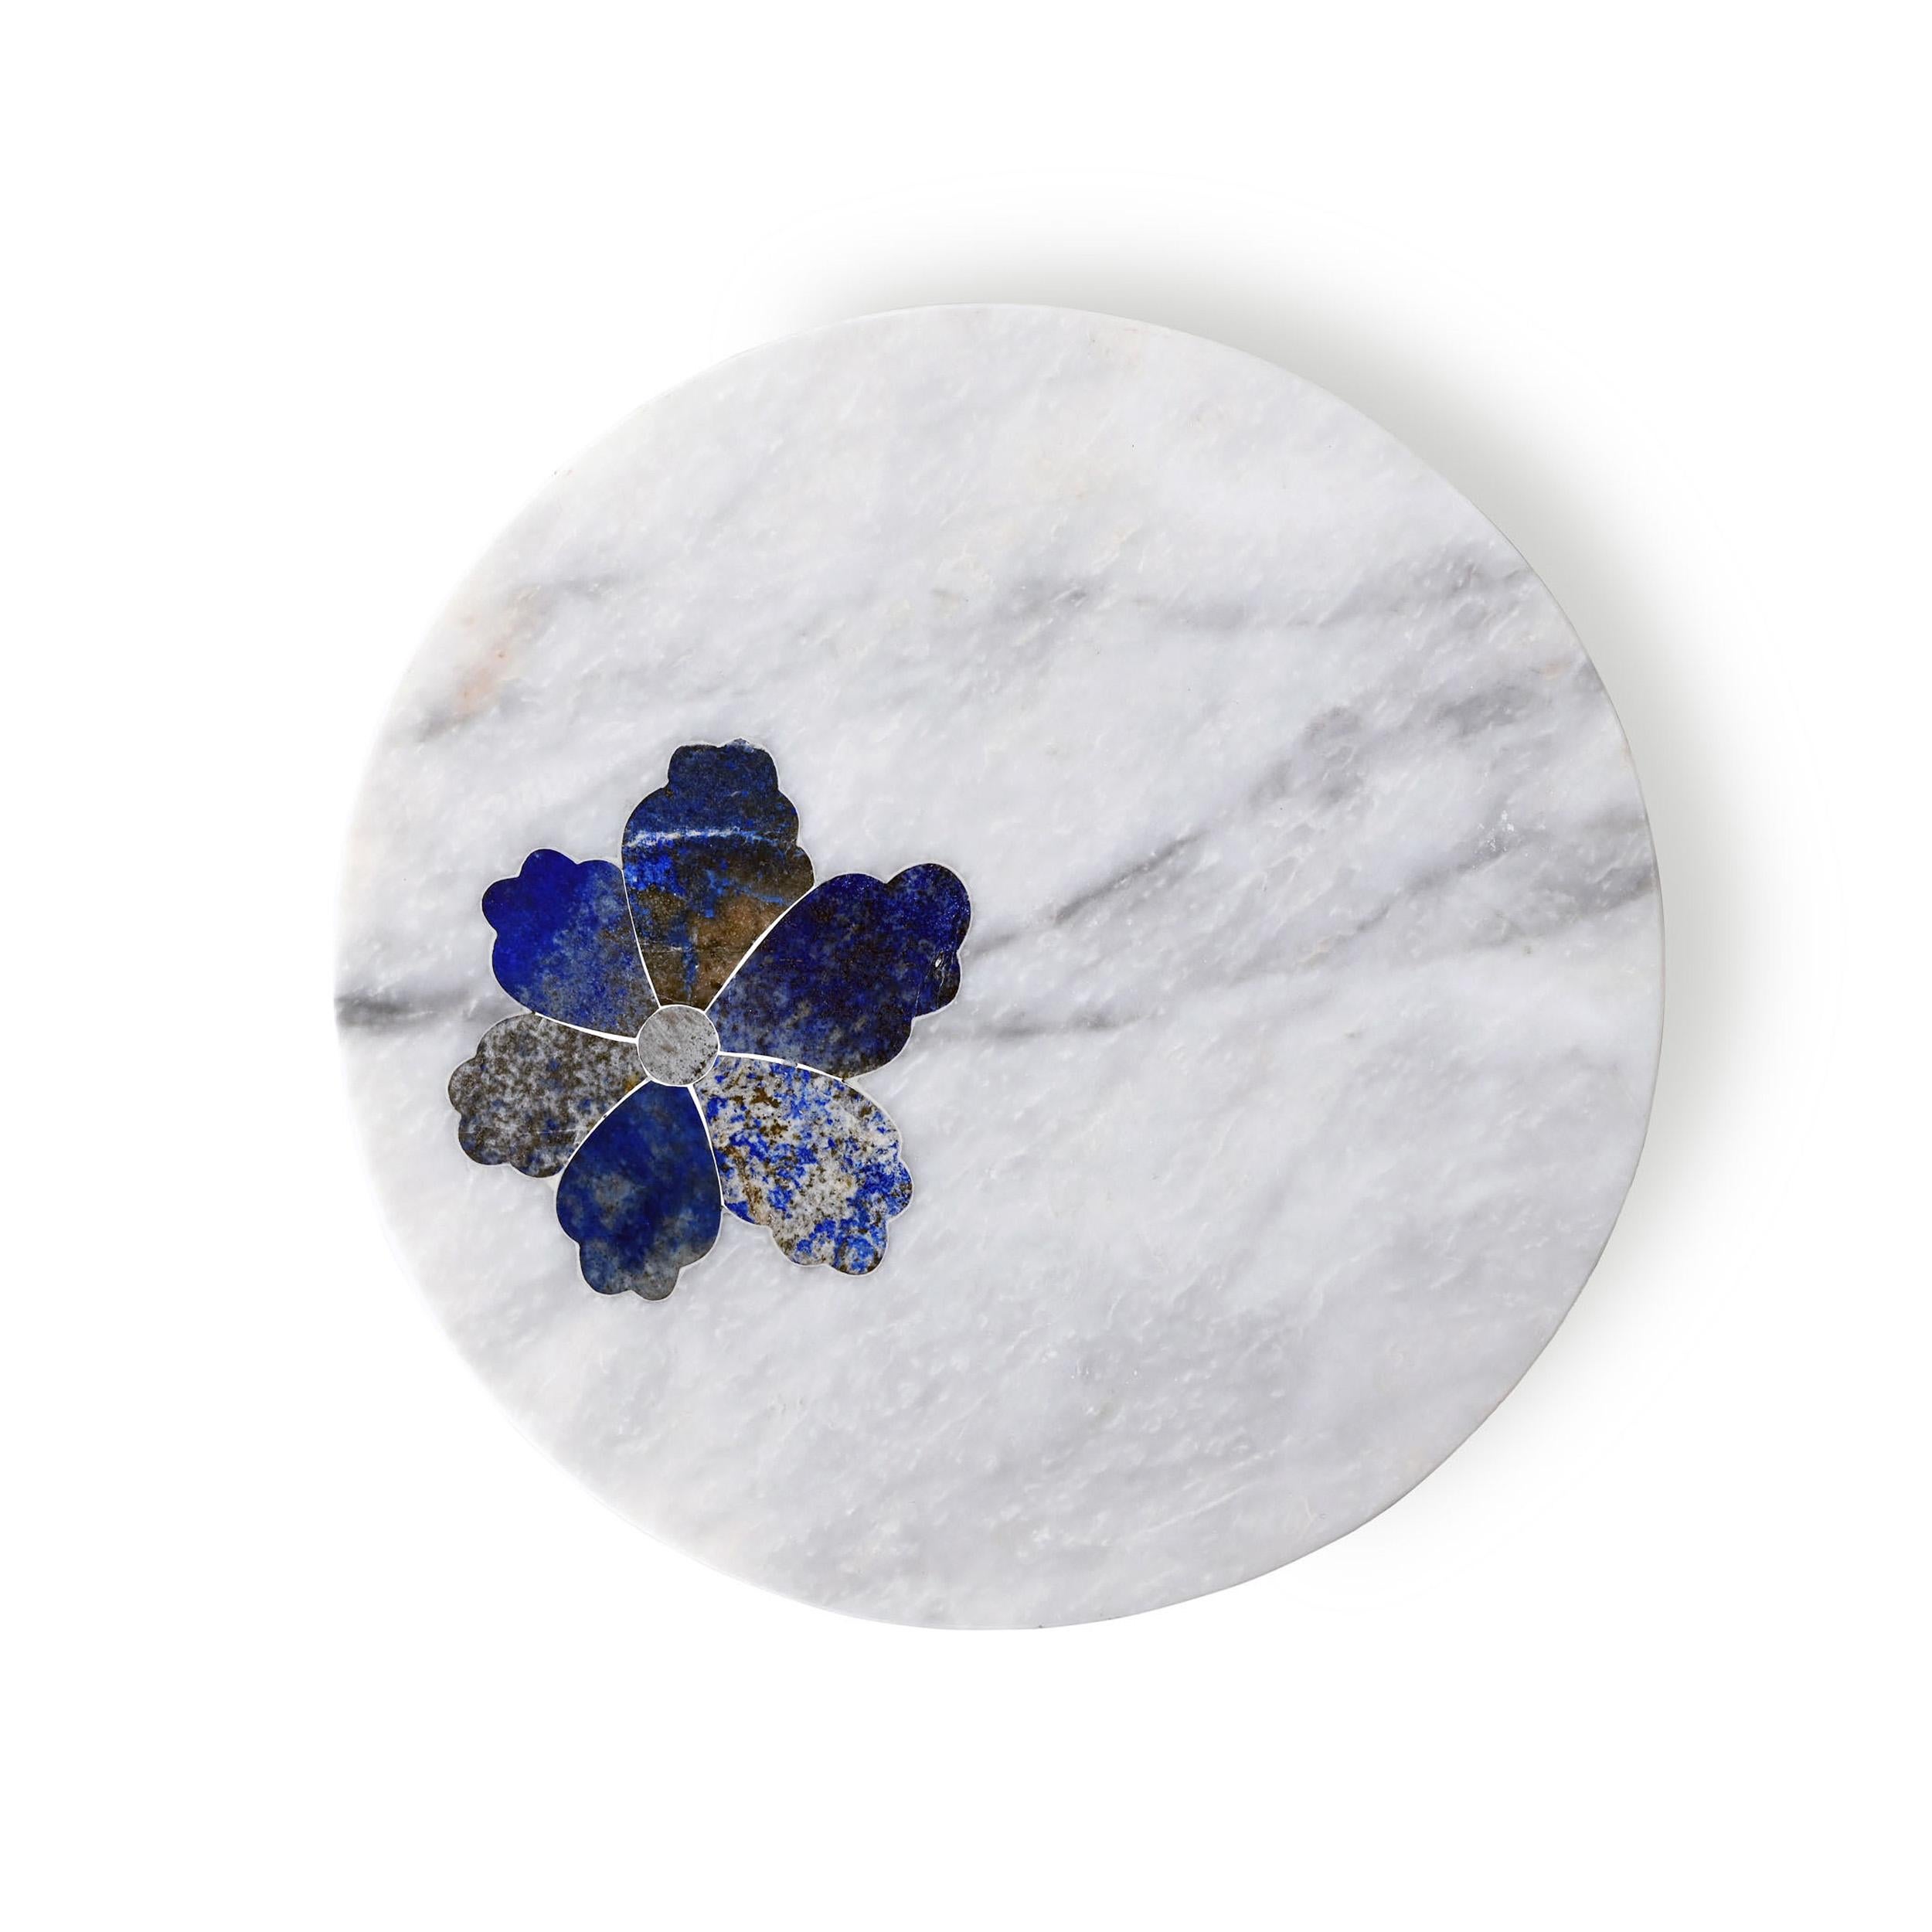 Bloom platter III by Studio Lel
Dimensions: D30.5 x H30.5 x H2.5 cm
Materials: Onyx, Marble

The word Ara is the onomatopoeic genus of the macaw, referencing the sounds made by the bright parrots depicted in every piece of the collection. Set in